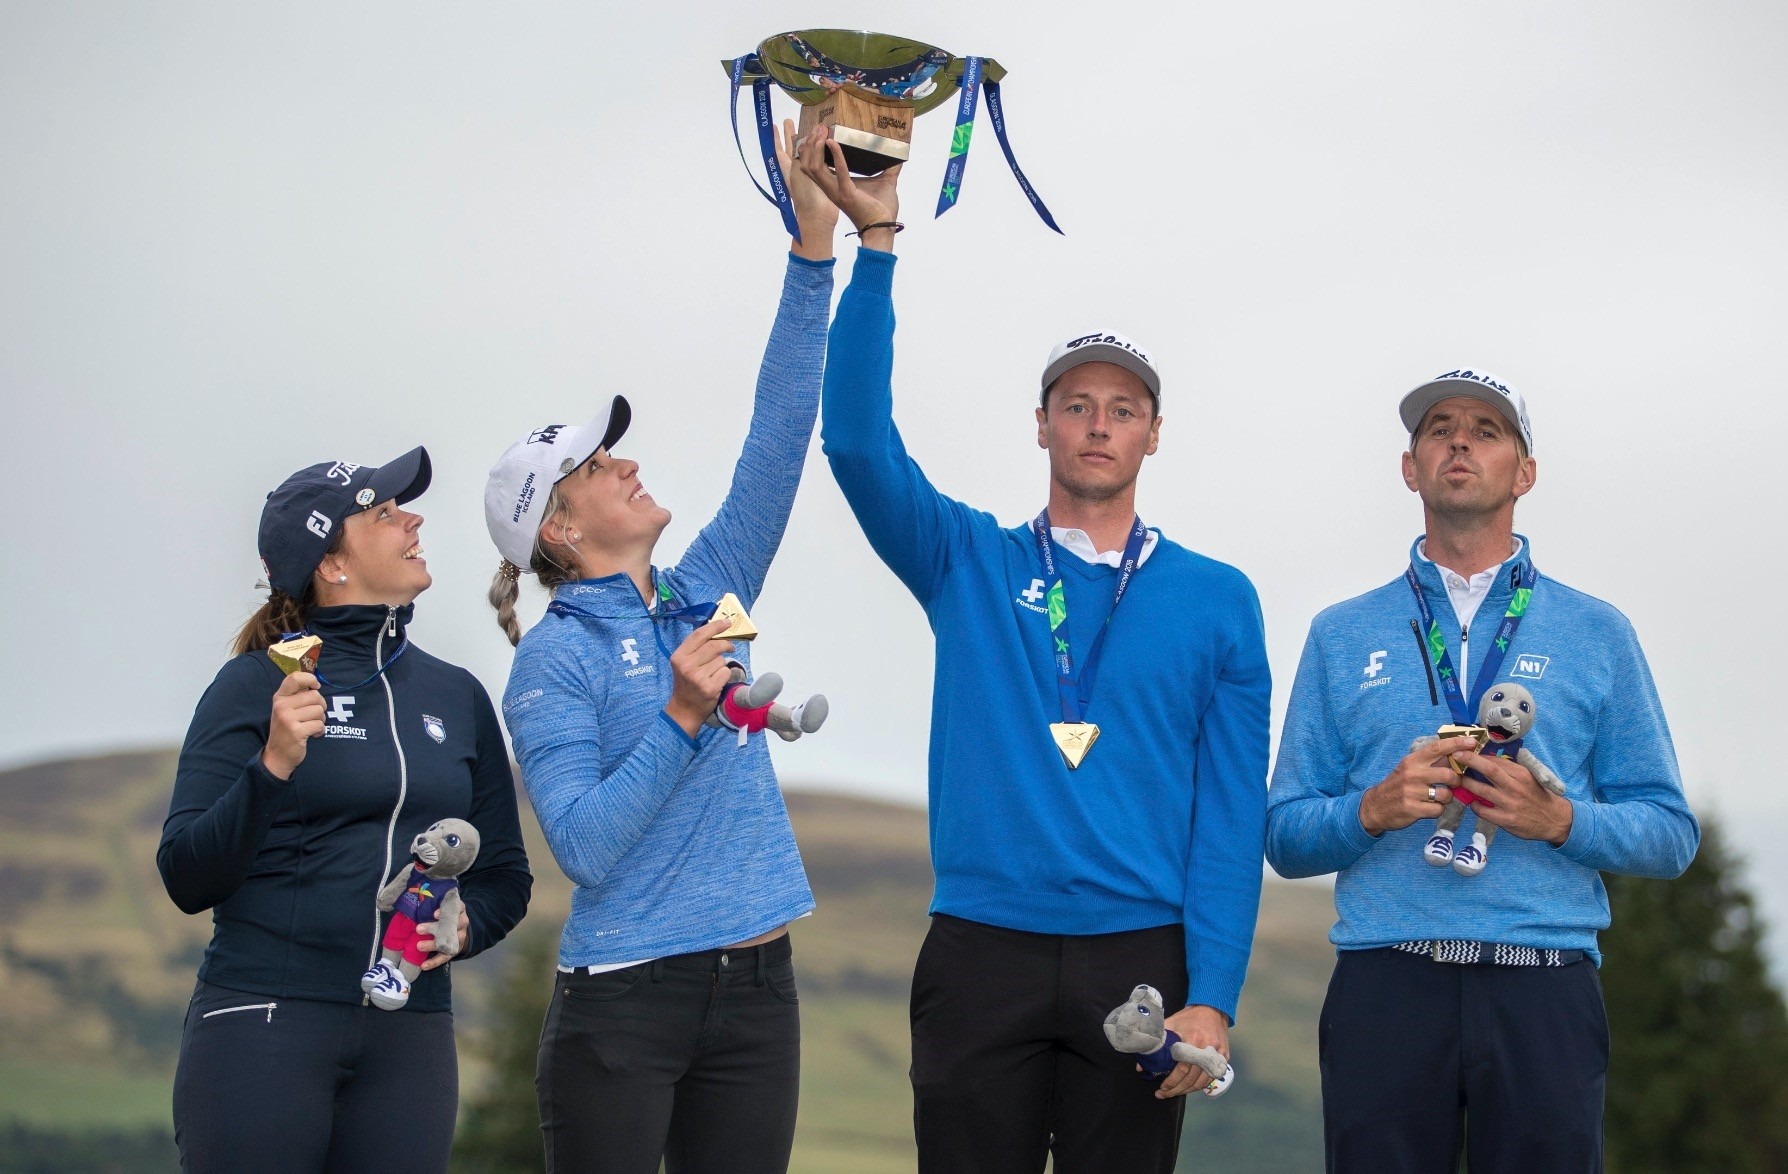 Team Iceland pose with their gold medals and the trophy after their victory during the European Championships at Gleneagles PGA Centenary Course, Scotland.